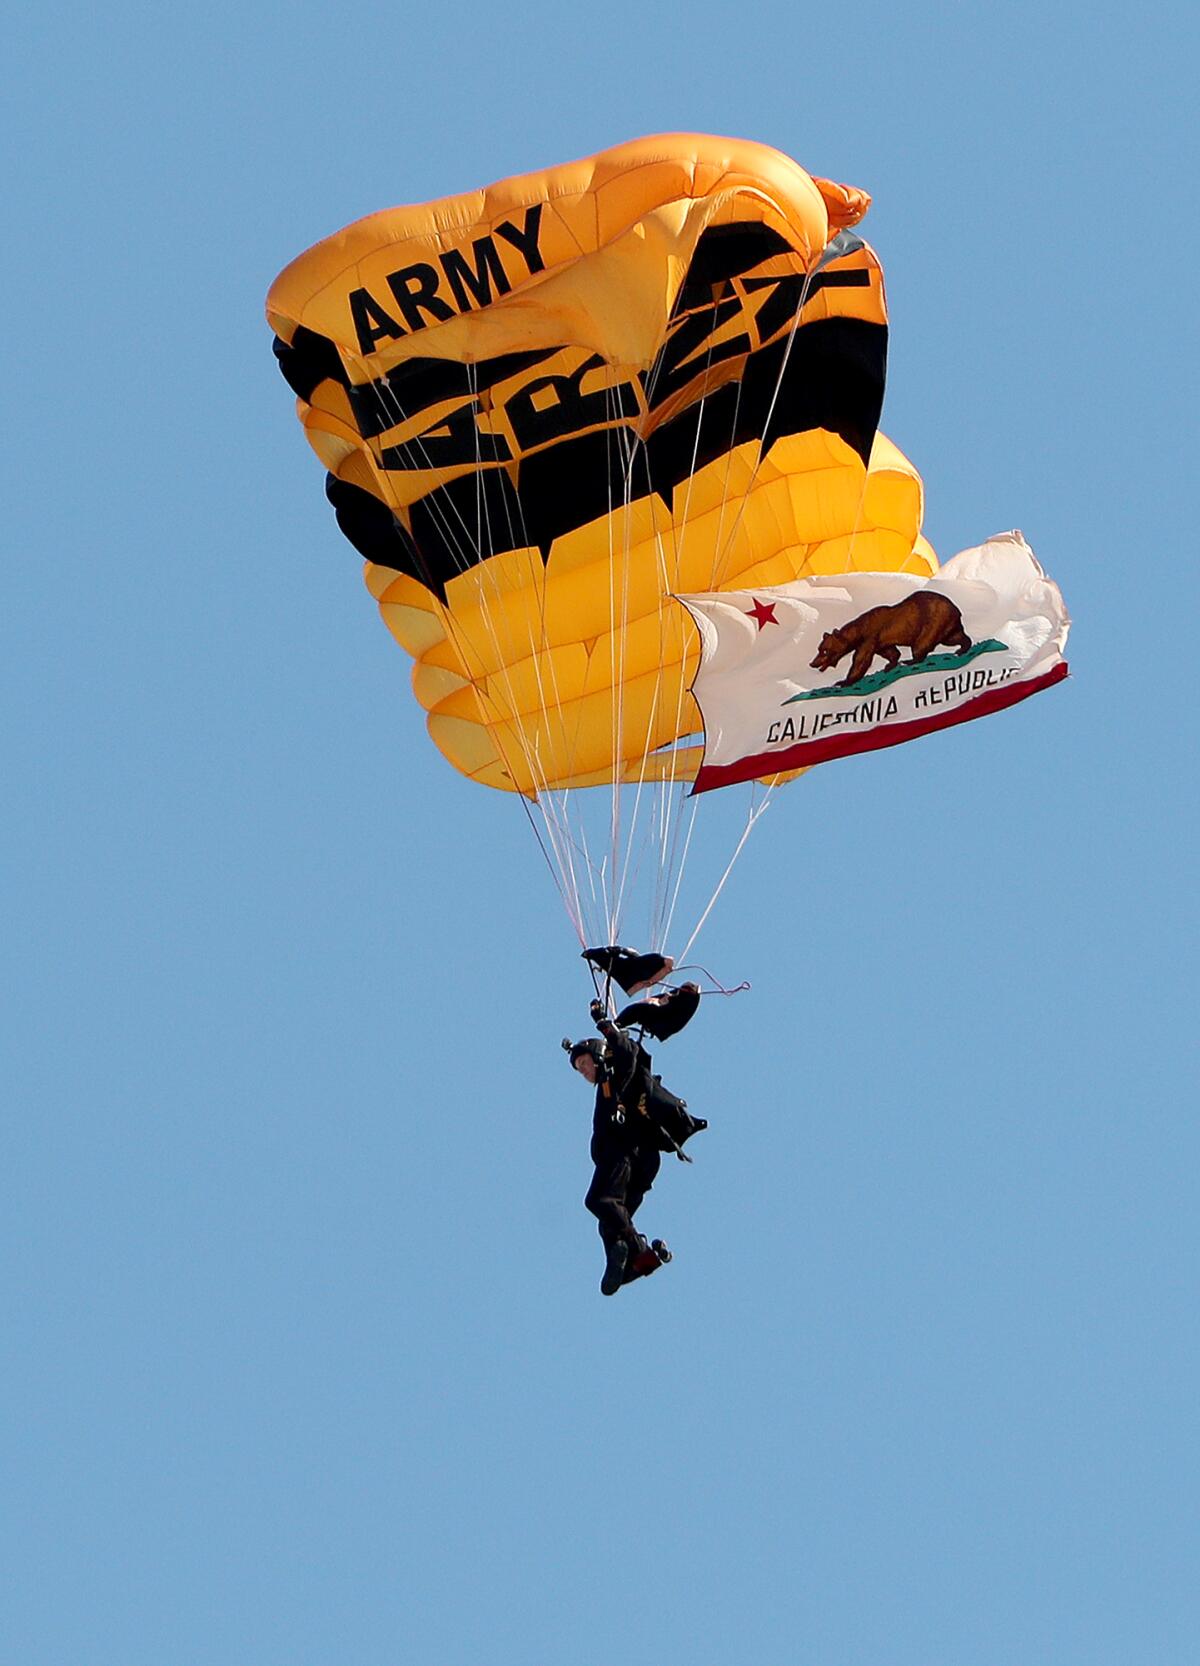 A member of the U.S. Army Golden Knights comes in for a landing on the first day of the Pacific Airshow last year.